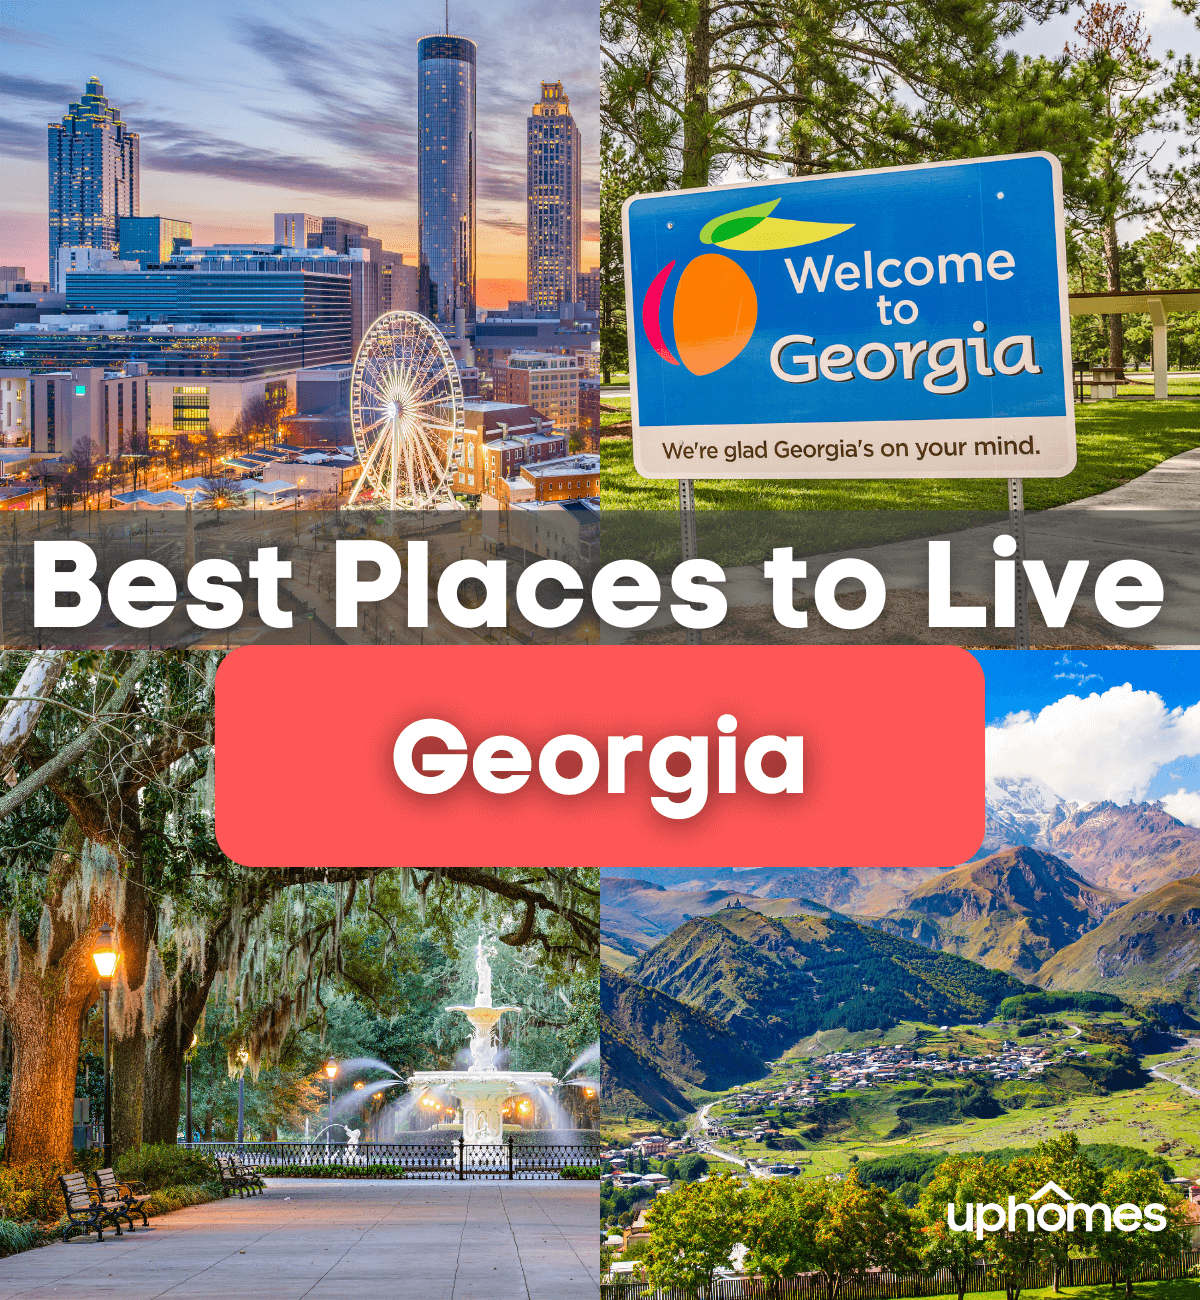 Best Places to Live in Georgia - Where are the Best Places to Live in Georgia?